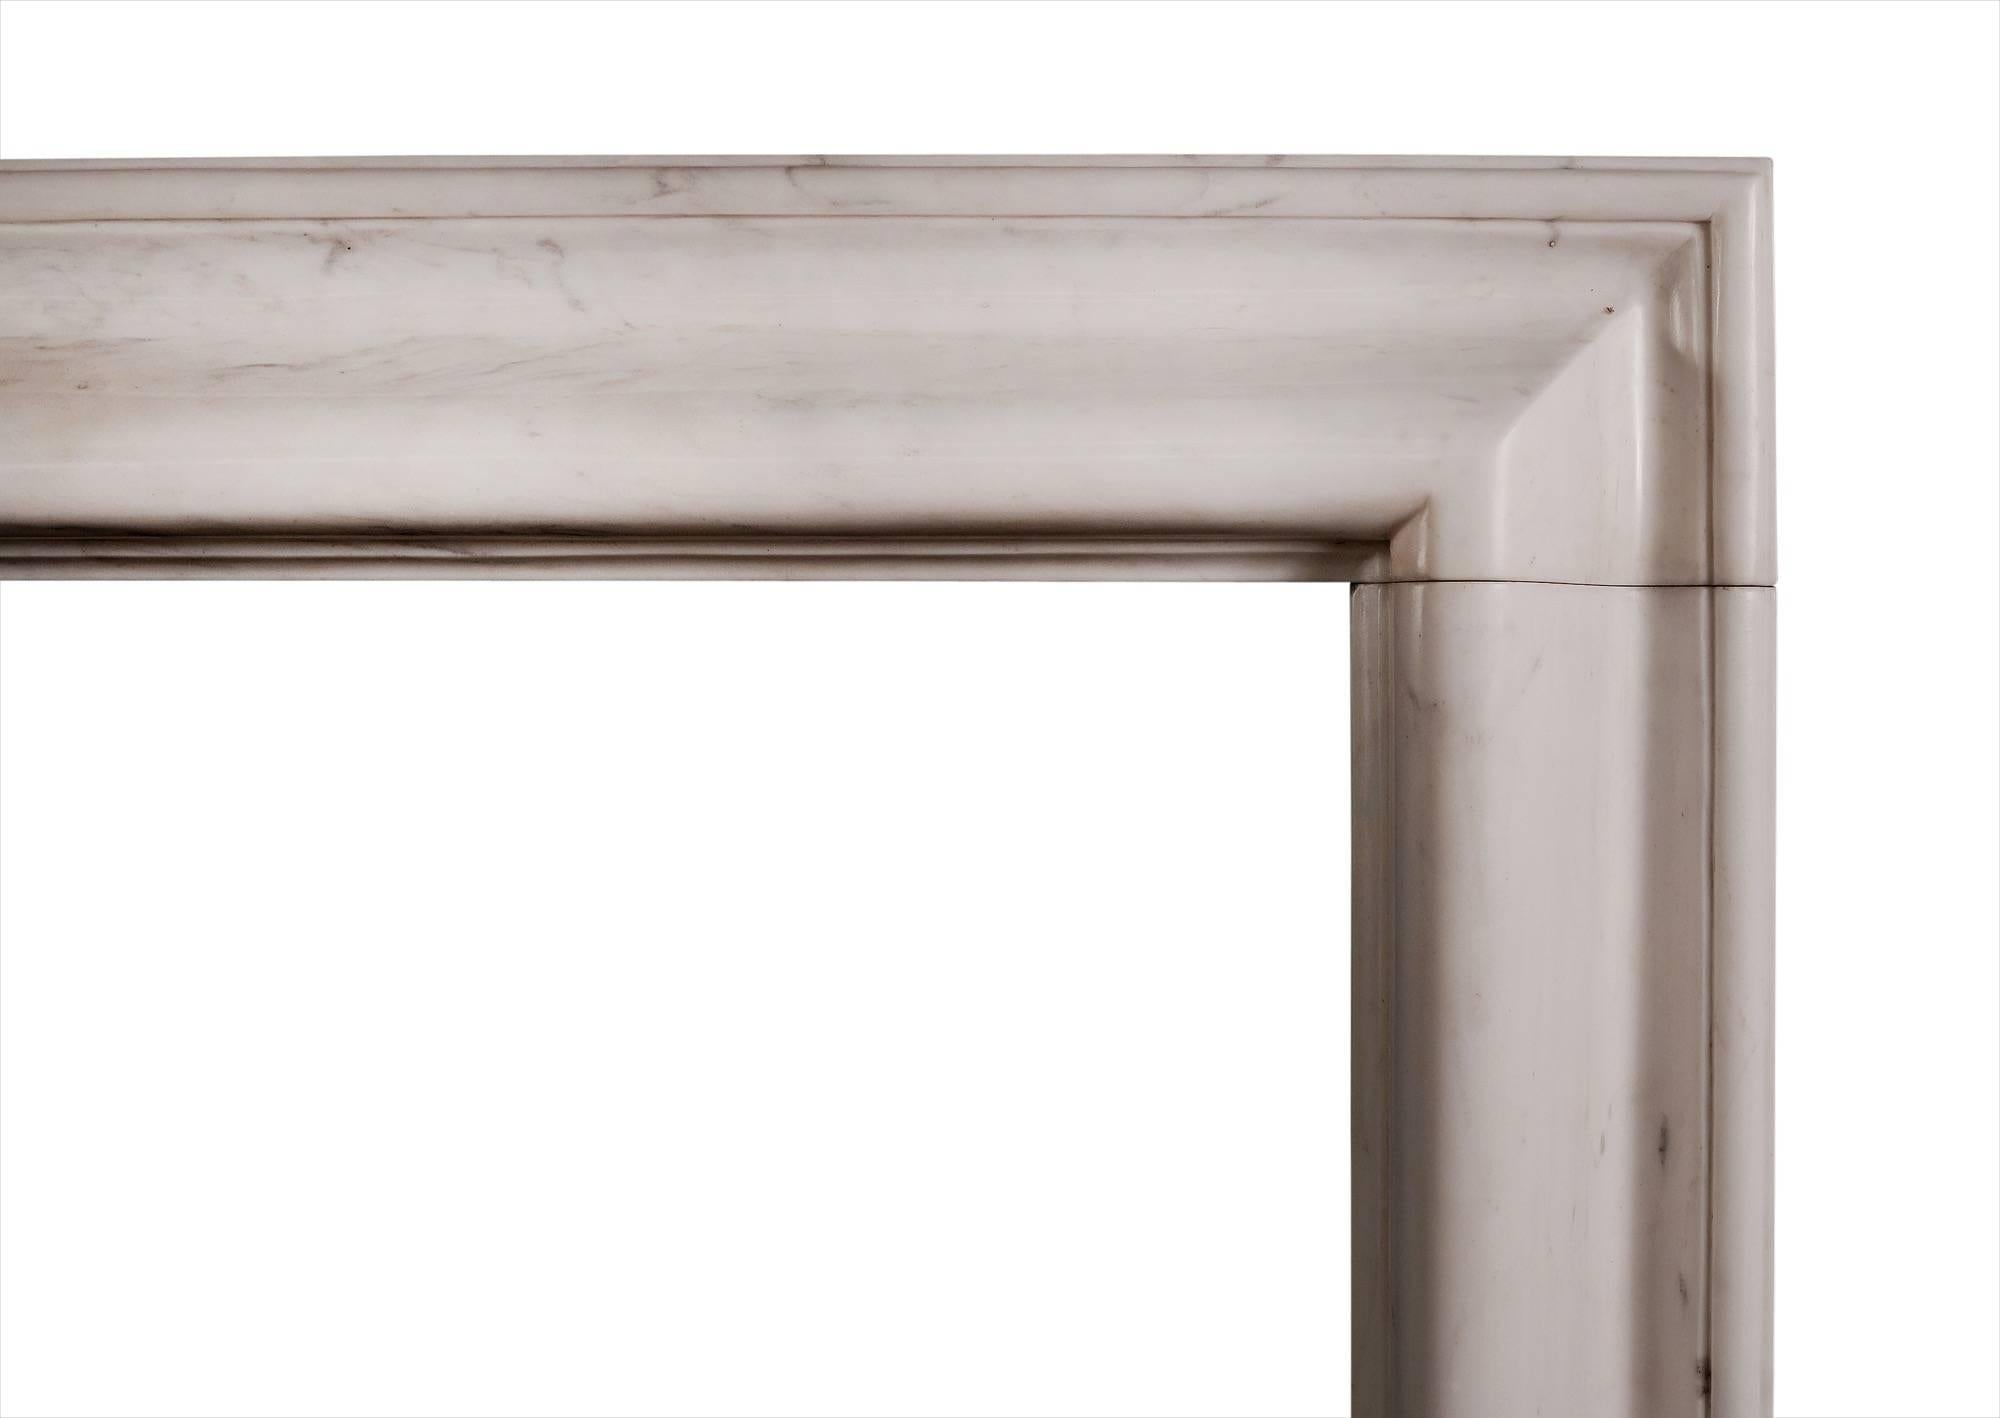 An attractive English bolection fireplace in a white marble. An unusually deep, substantial moulding with good quality white marble. A copy of the Queen Anne design. Also available in other marbles if required.

Shelf width:            1420 mm /    